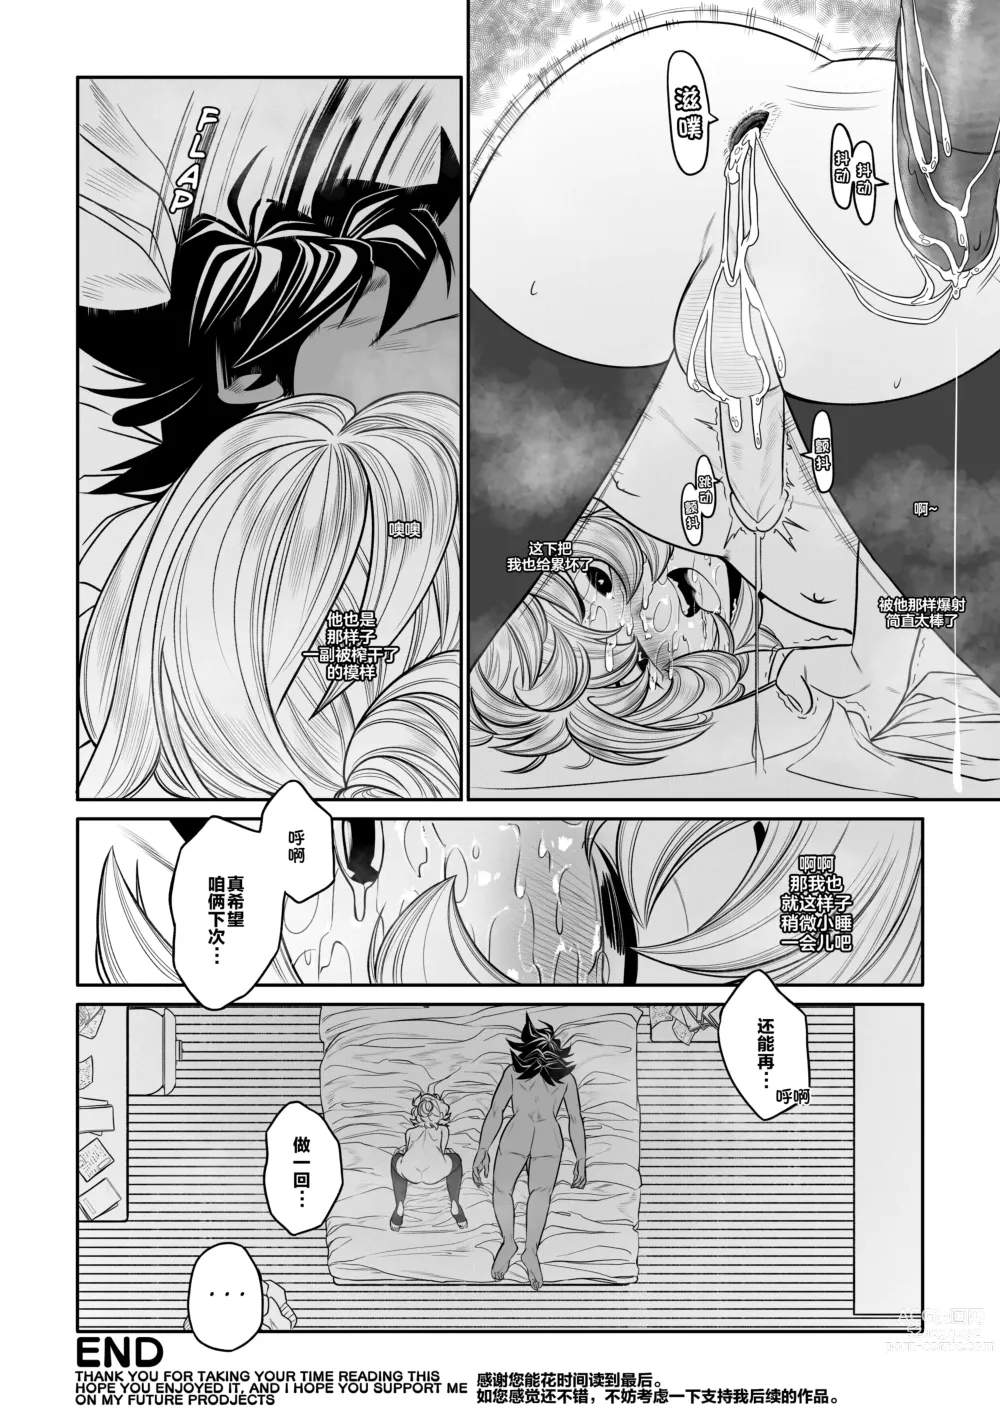 Page 24 of doujinshi 狡猾小恶魔